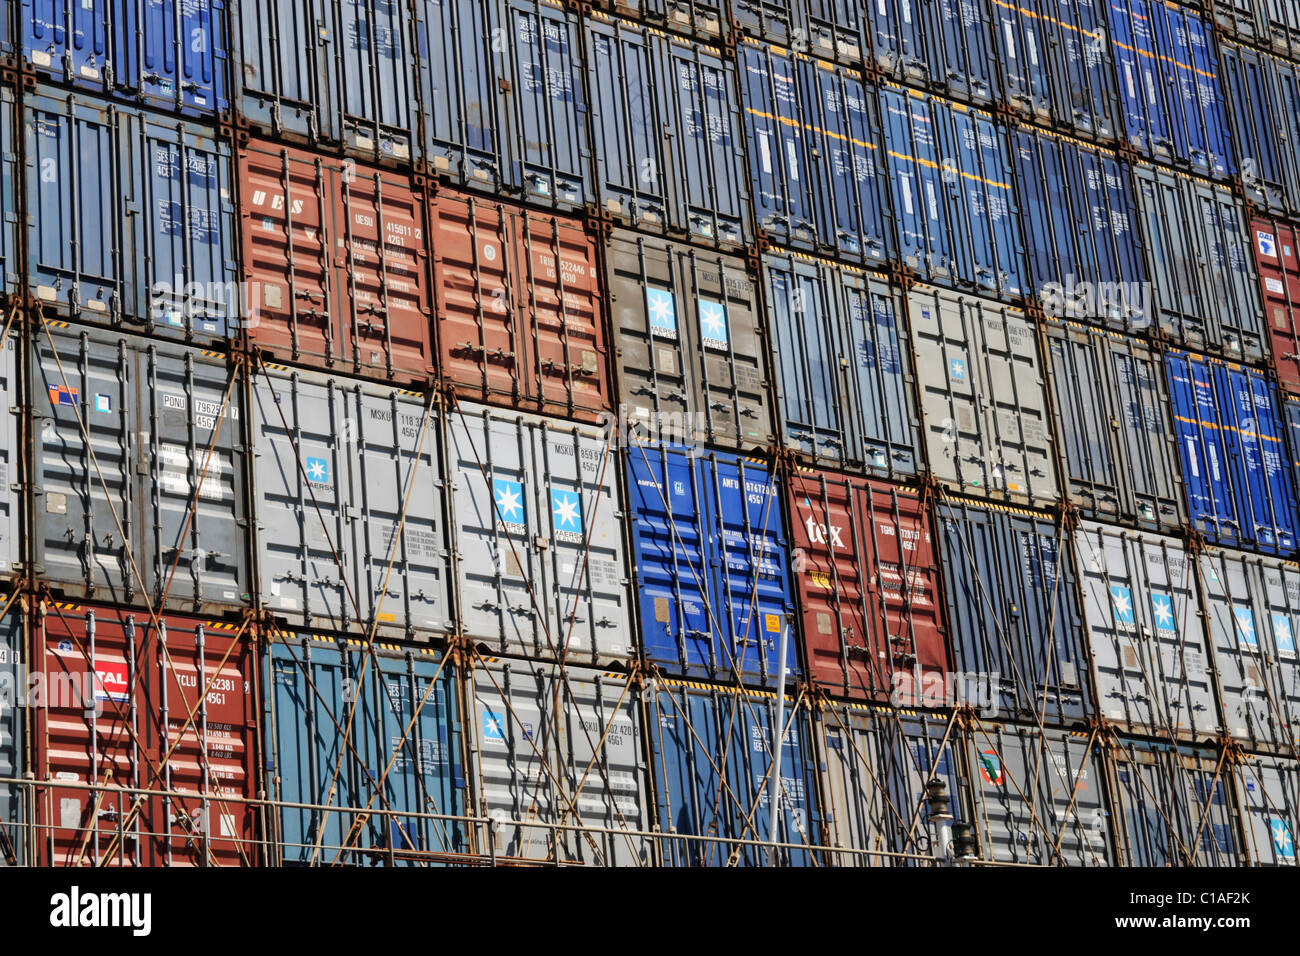 Shipping containers stacked on ship Stock Photo